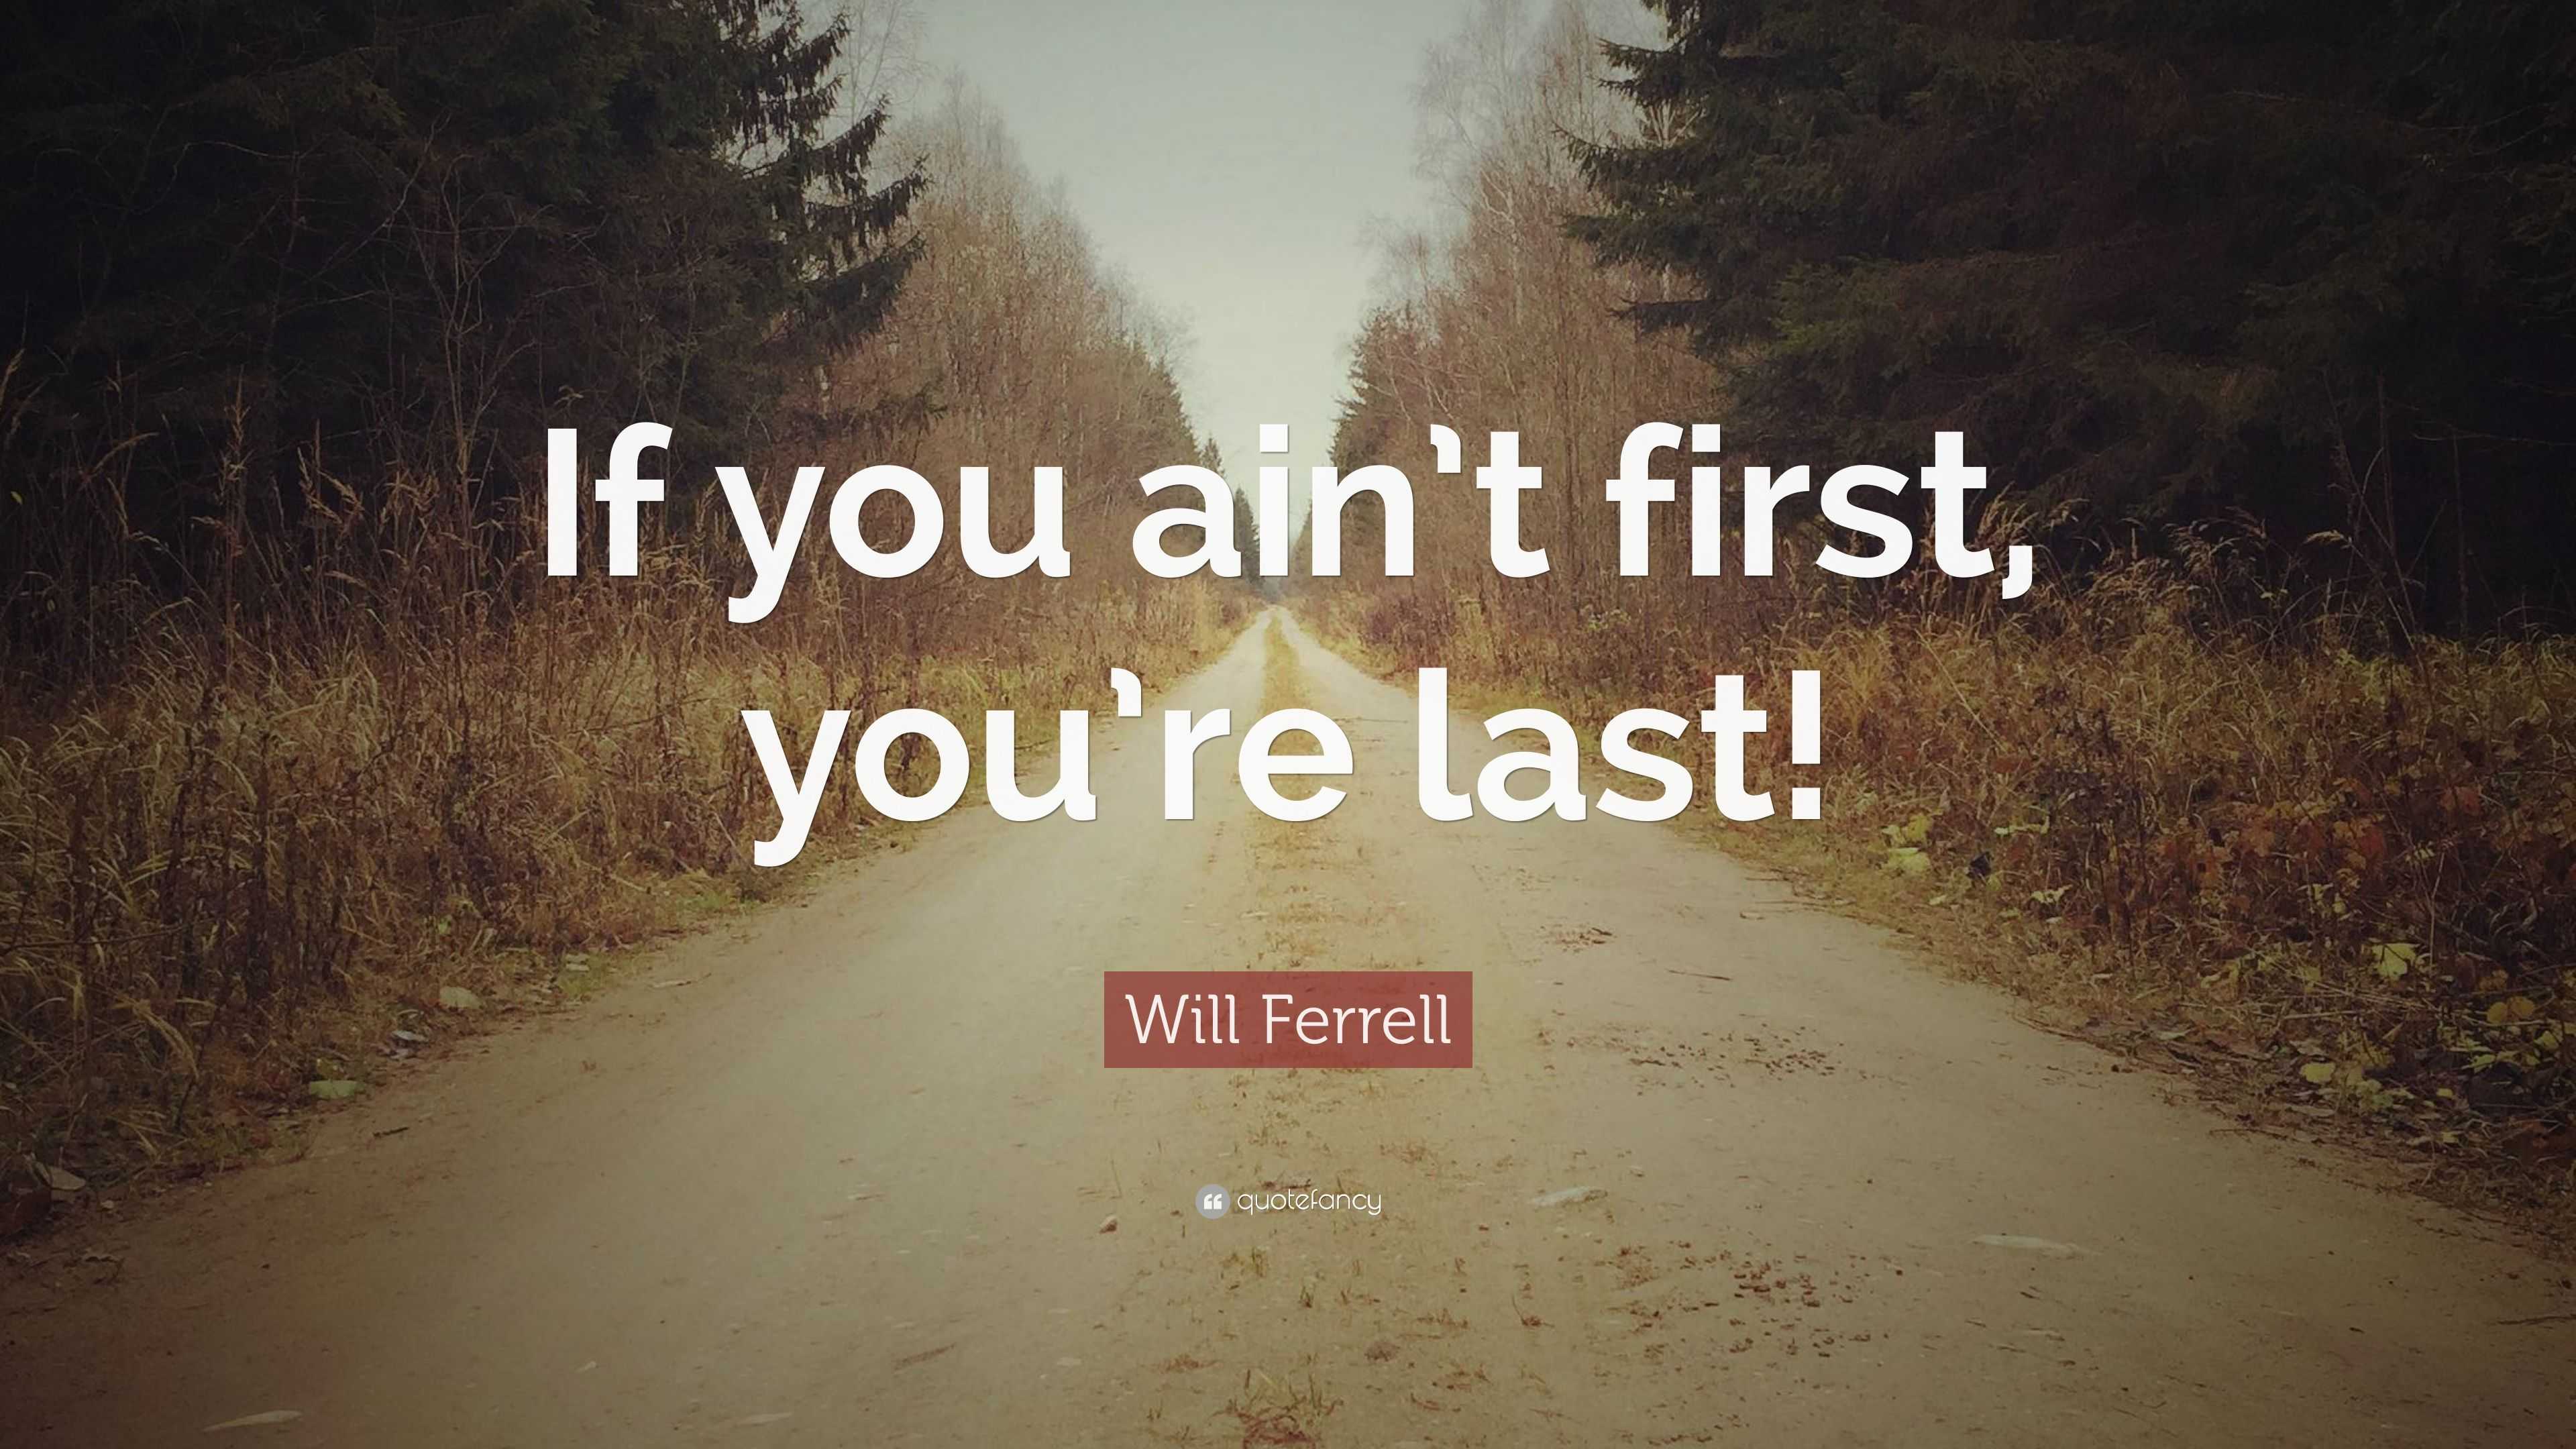 Will Ferrell Quote: "If you ain't first, you're last!" (7 wallpapers) - Quotefancy